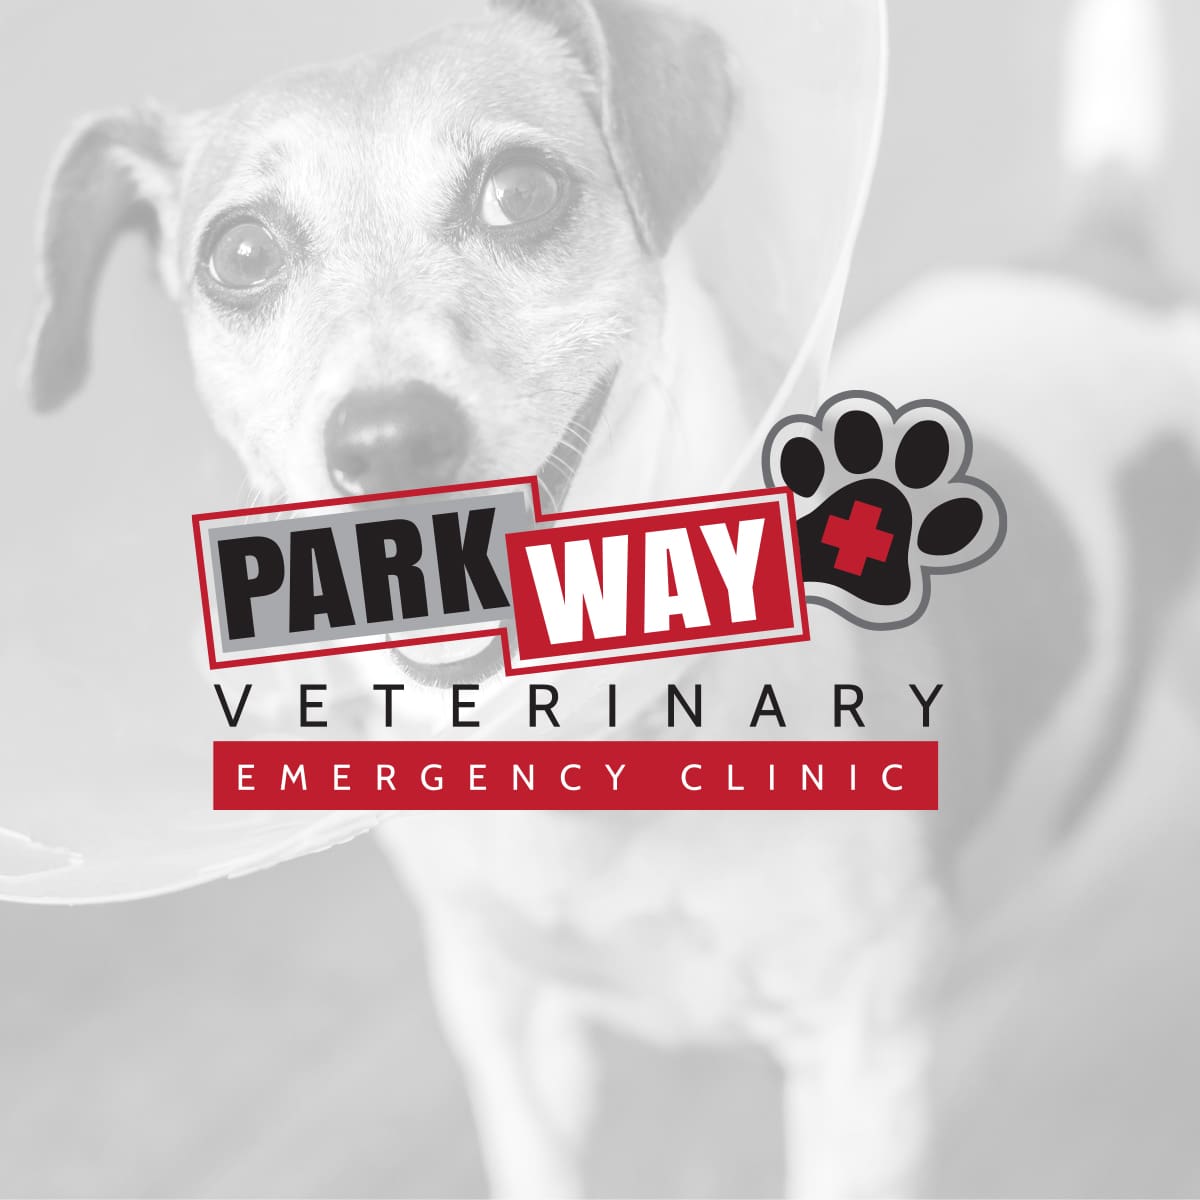 <span style="font-size: 21px;"><strong>Parkway Veterinary<br> Emergency Clinic</strong></span><br>
Logo design